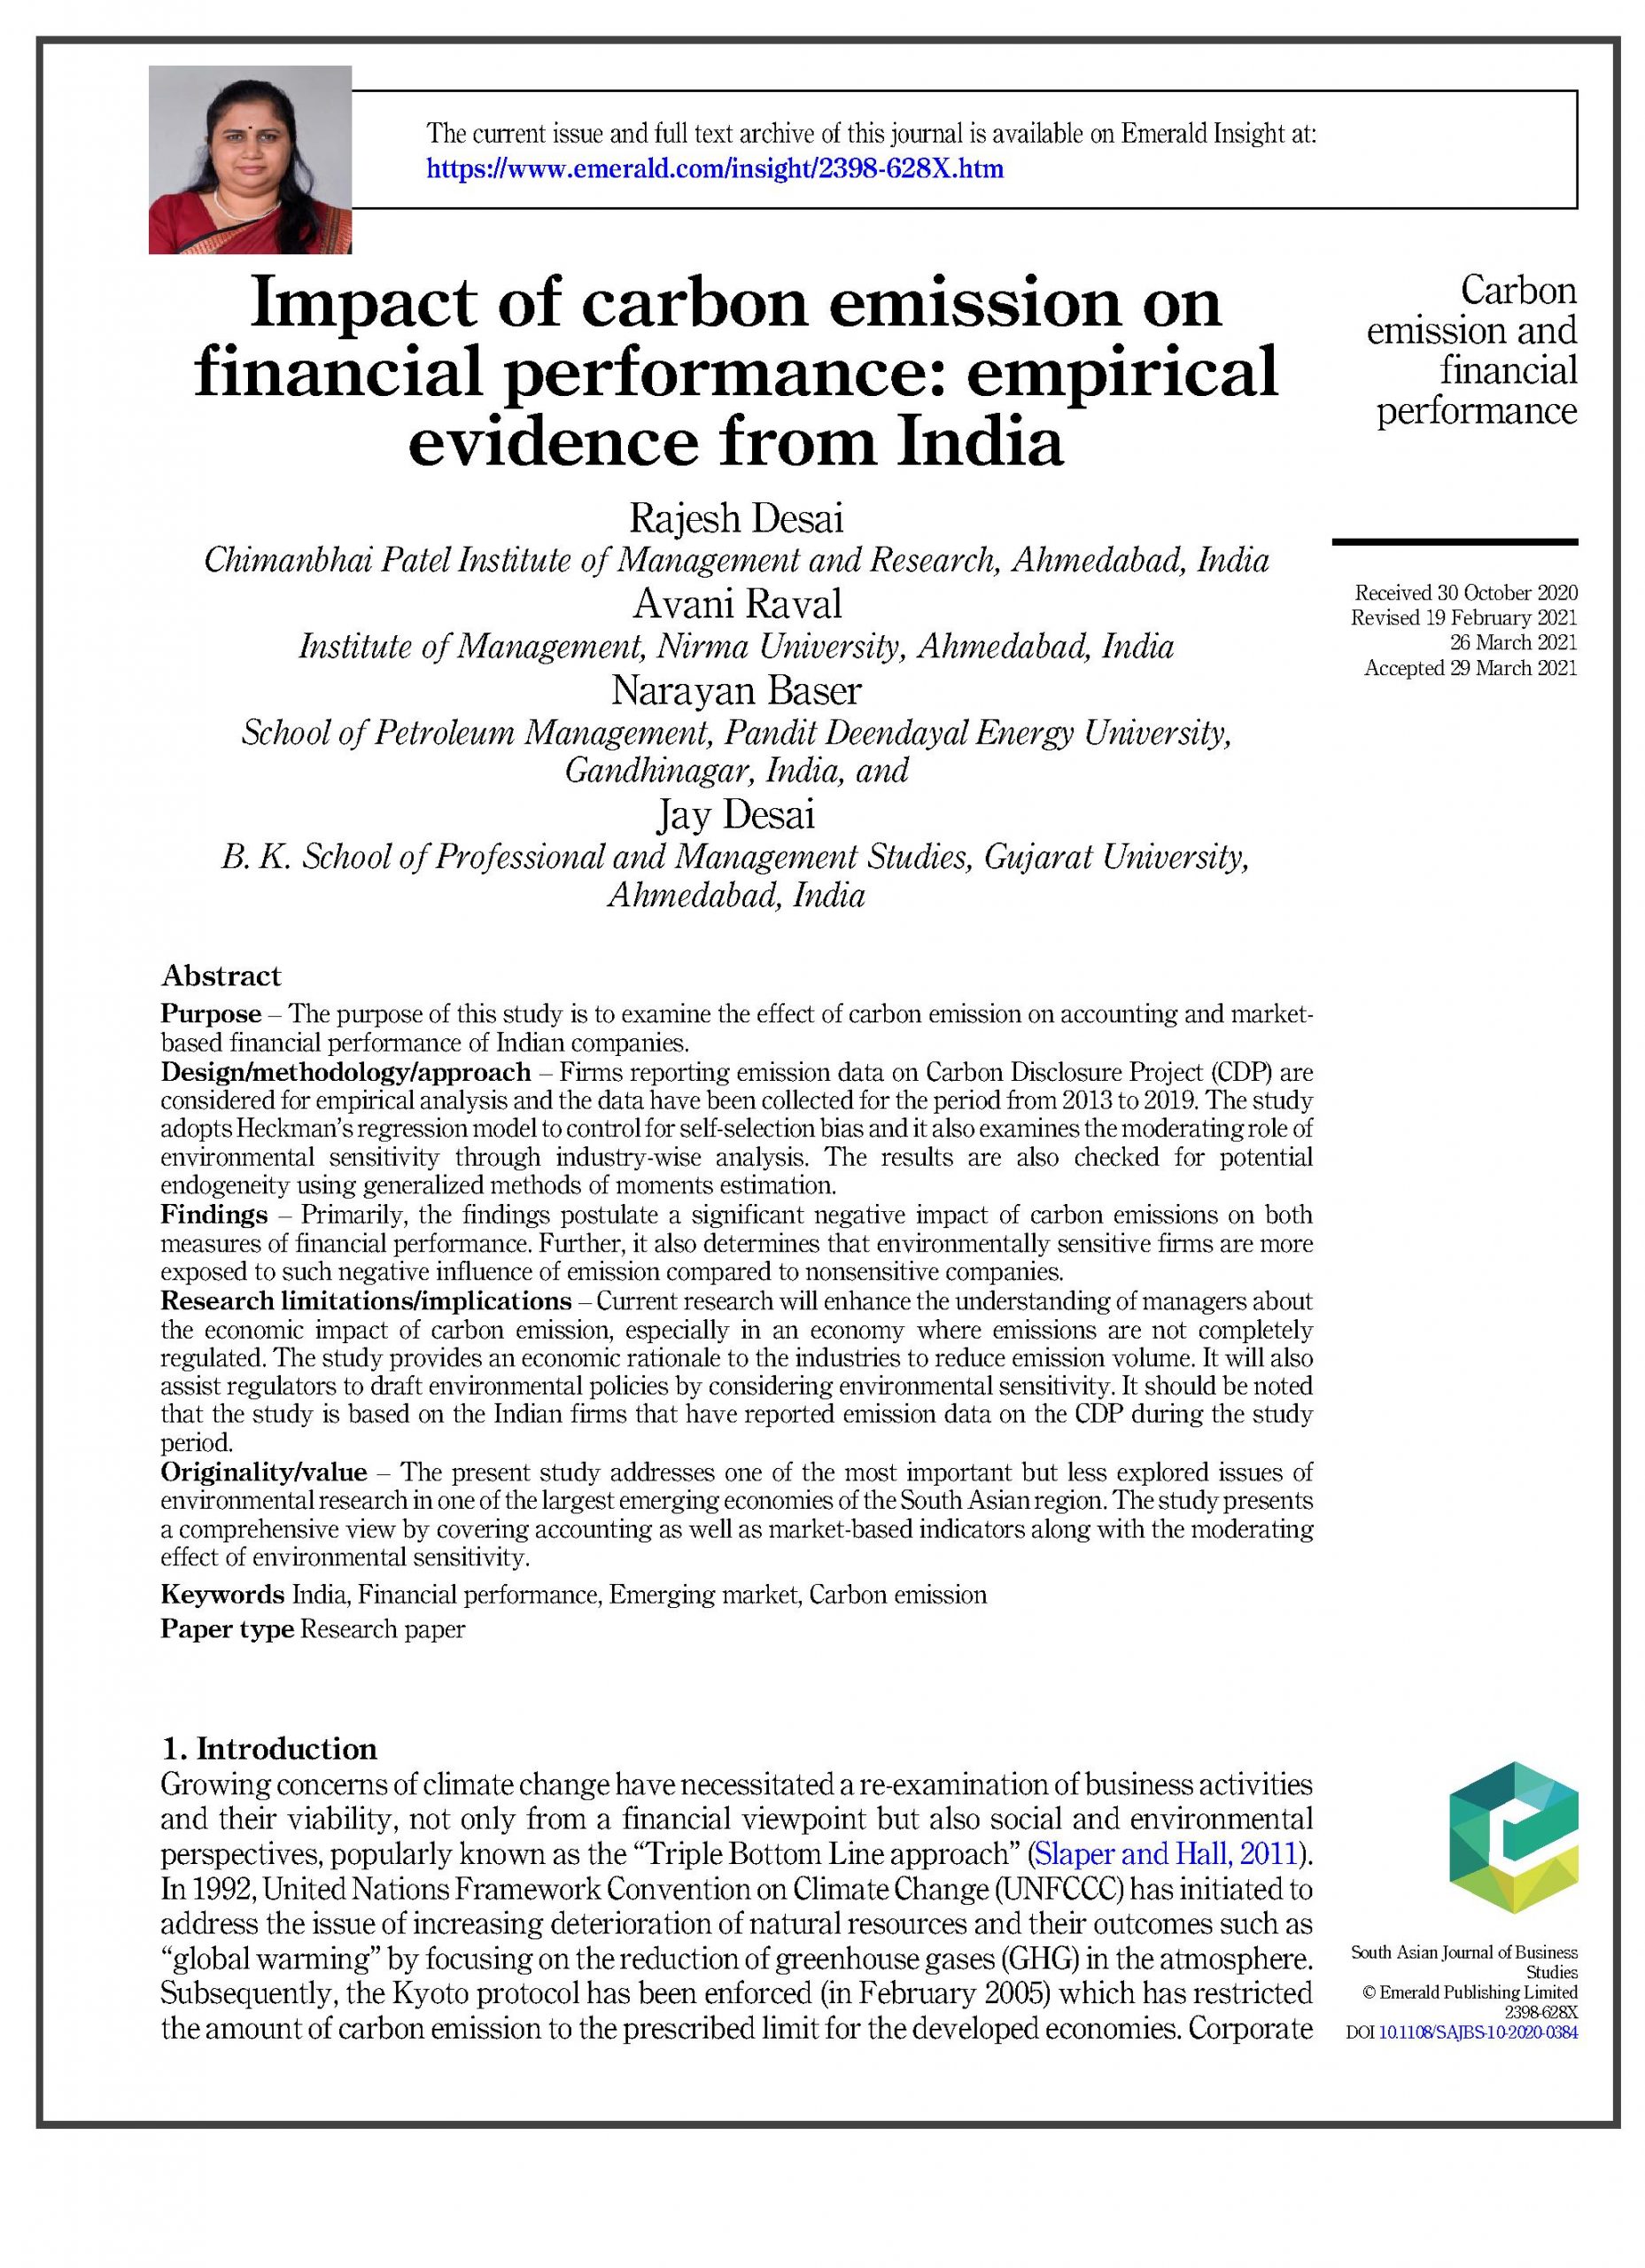 Impact of carbon emission on financial performance: empirical evidence from India